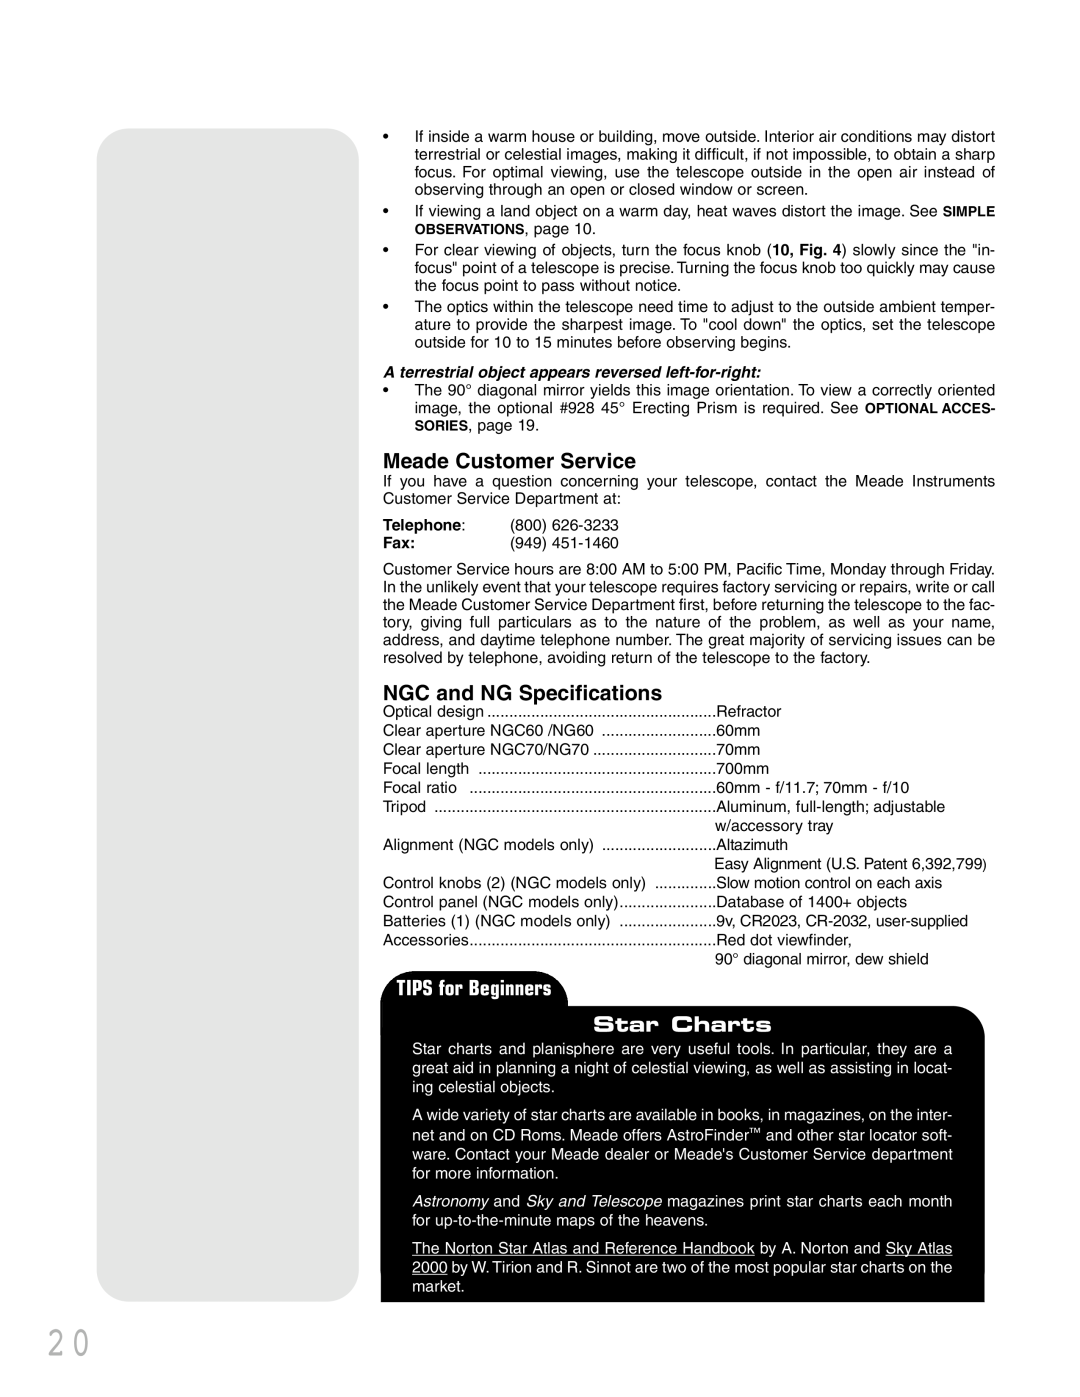 Meade instruction manual Meade Customer Service, NGC and NG Specifications, TIPS for Beginners Star Charts 